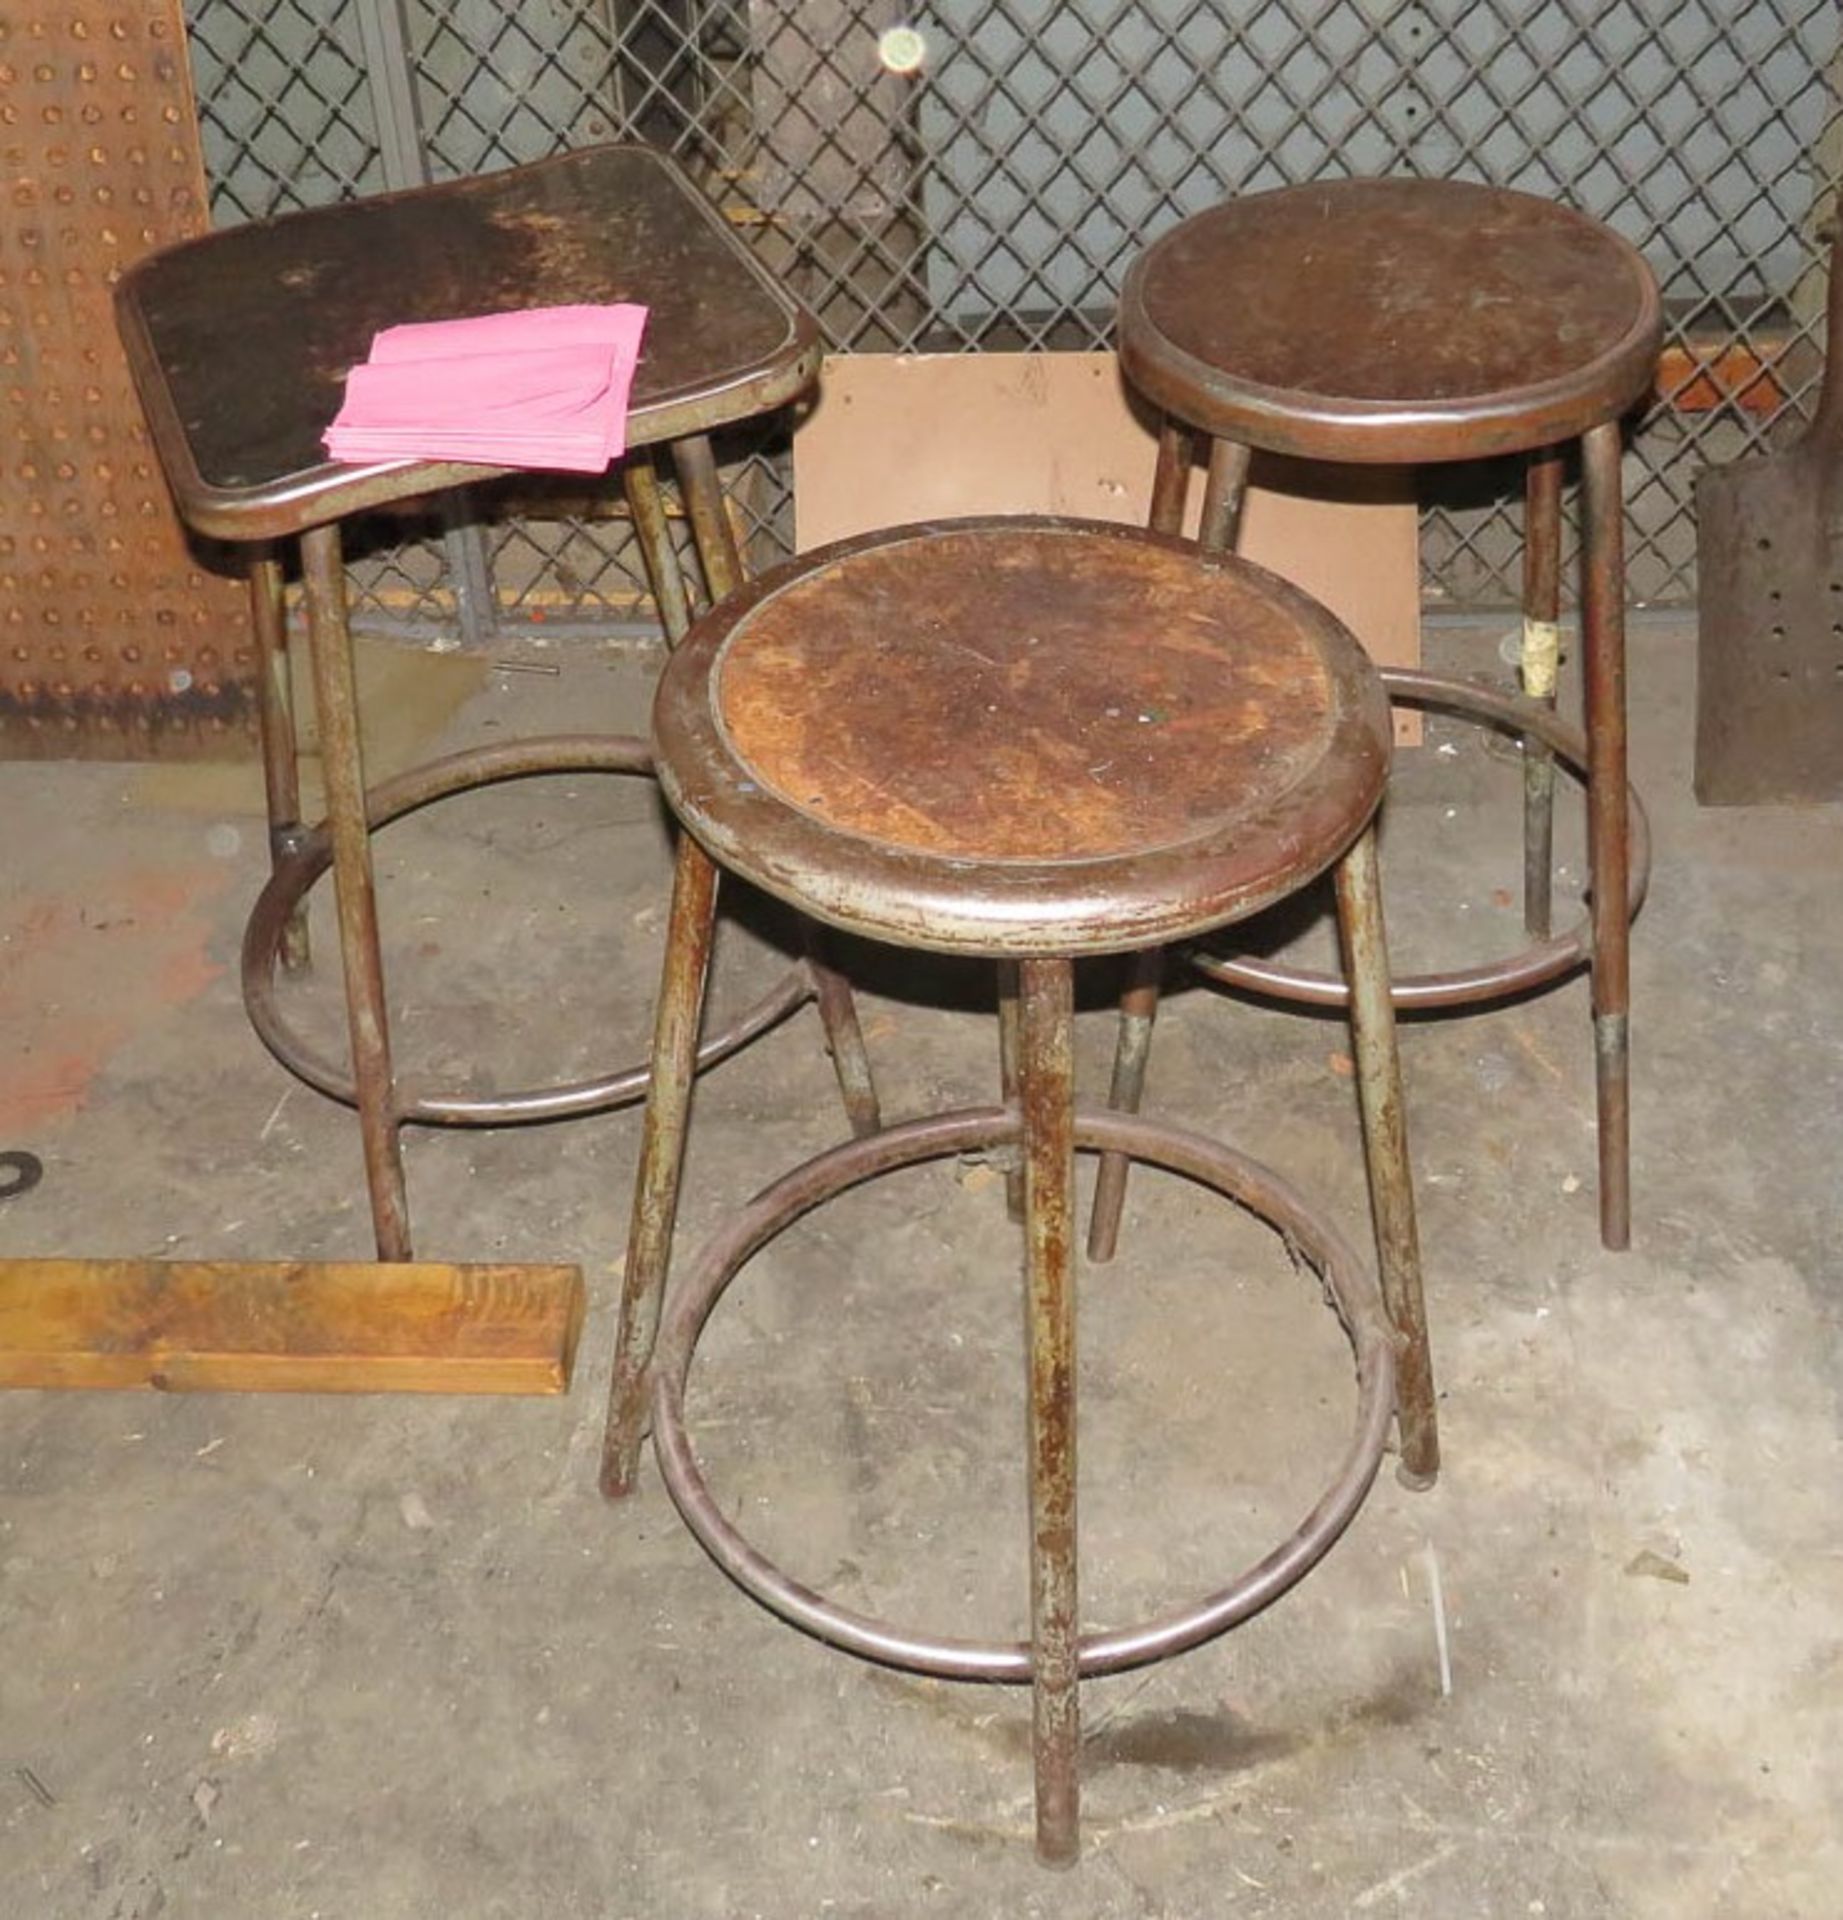 APPROXIMATELY [20] SHOP STOOLS [LOCATED AT 280 HARTFORD AVENUE, NEWINGTON, CT]